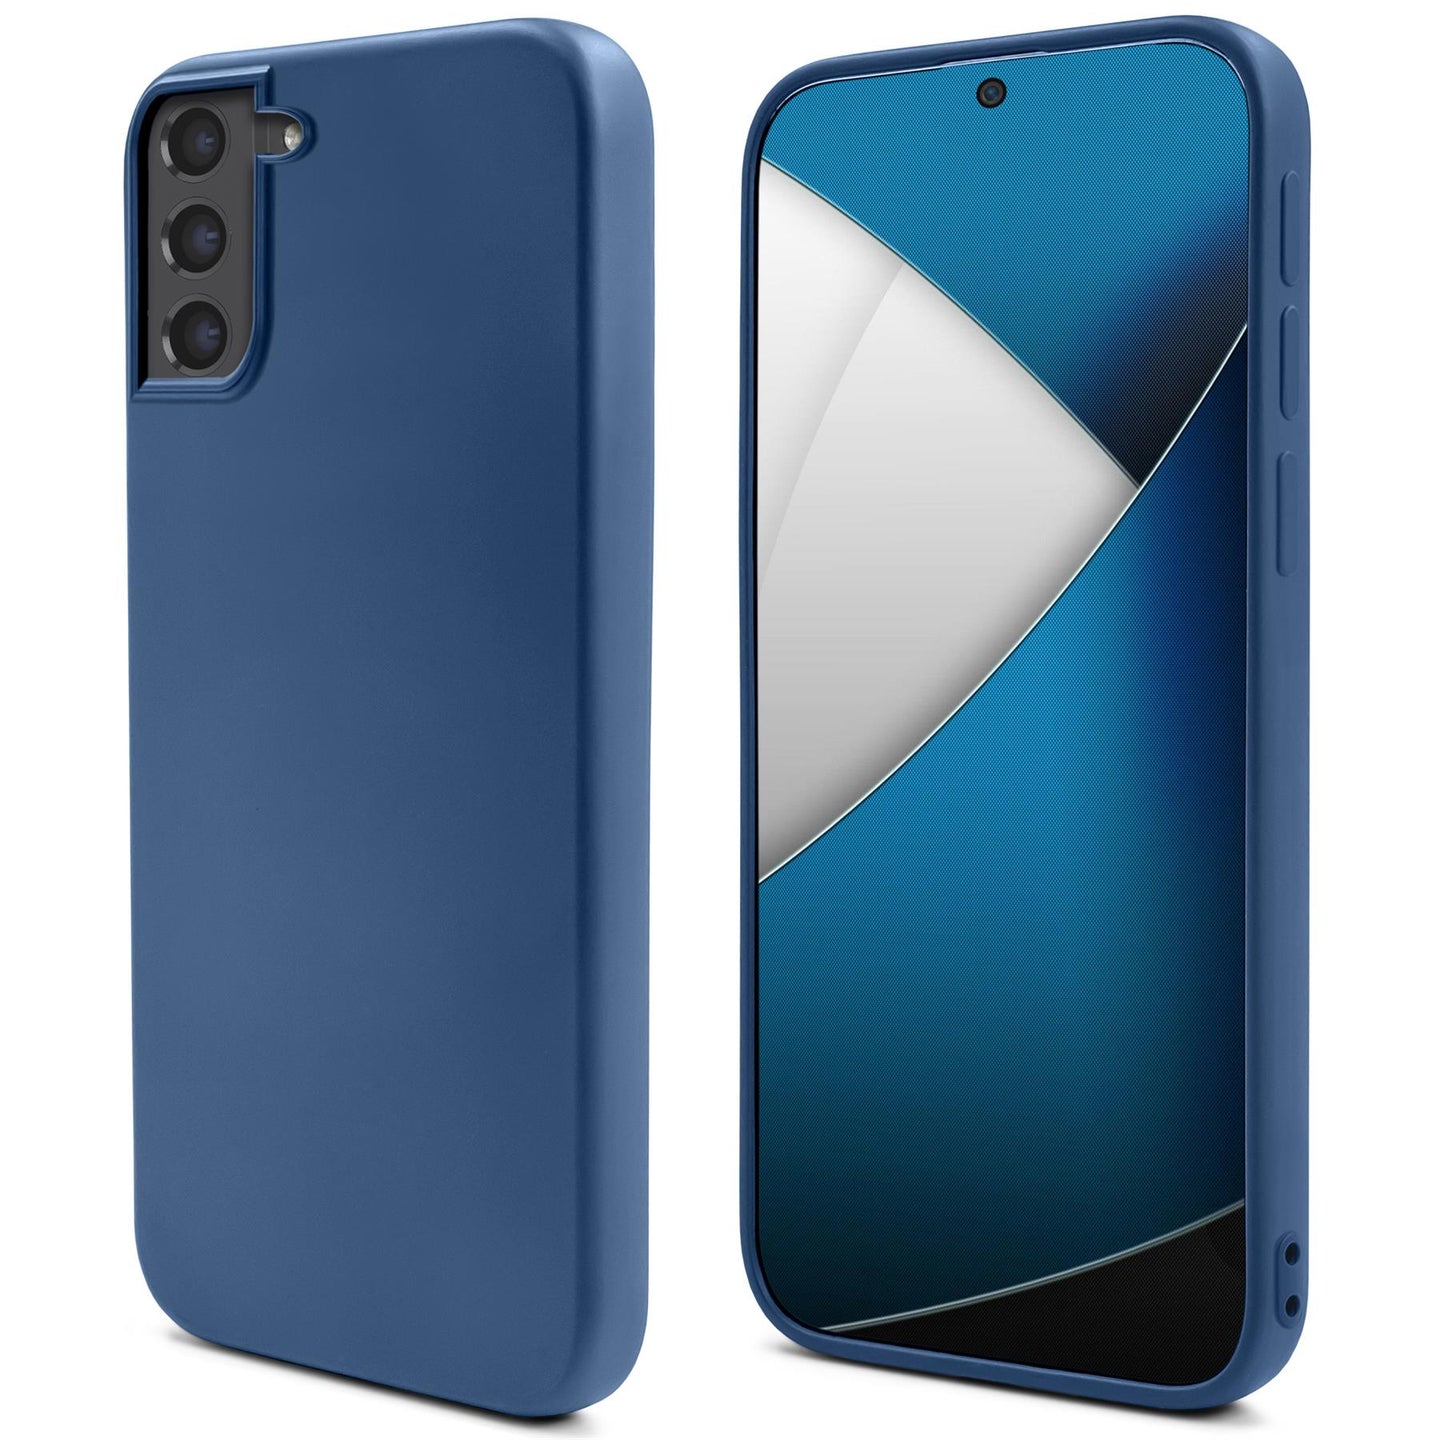 Moozy Lifestyle. Silicone Case for Samsung S21 FE, Midnight Blue - Liquid Silicone Lightweight Cover with Matte Finish and Soft Microfiber Lining, Premium Silicone Case